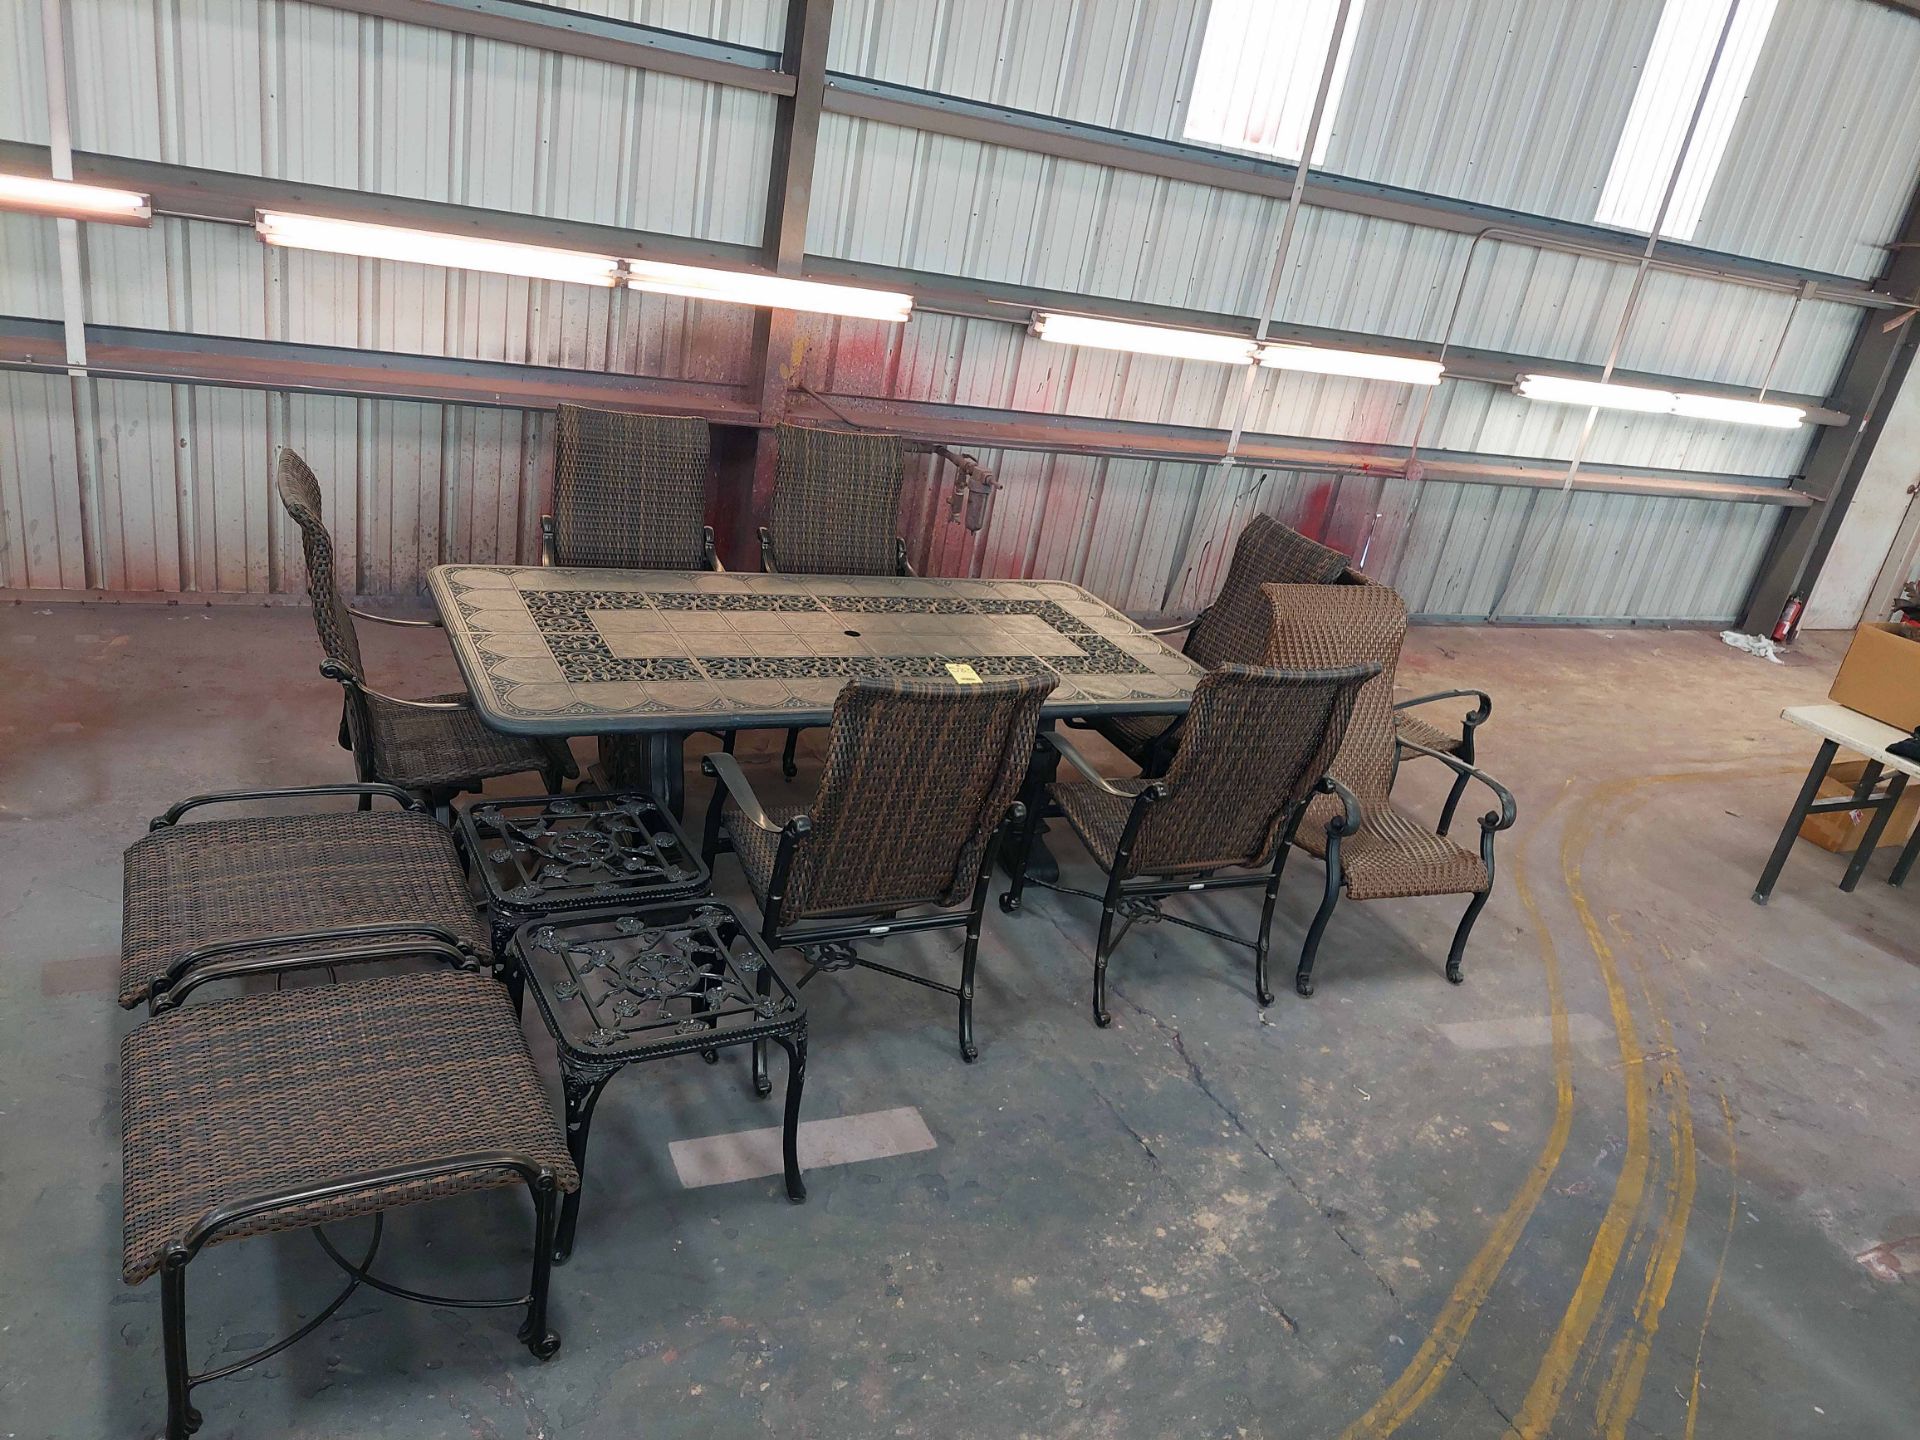 LOT OF PATIO FURNITURE (Location: MDS Boring & Drilling, 11900 Hirsch Road, Houston, TX 77050)